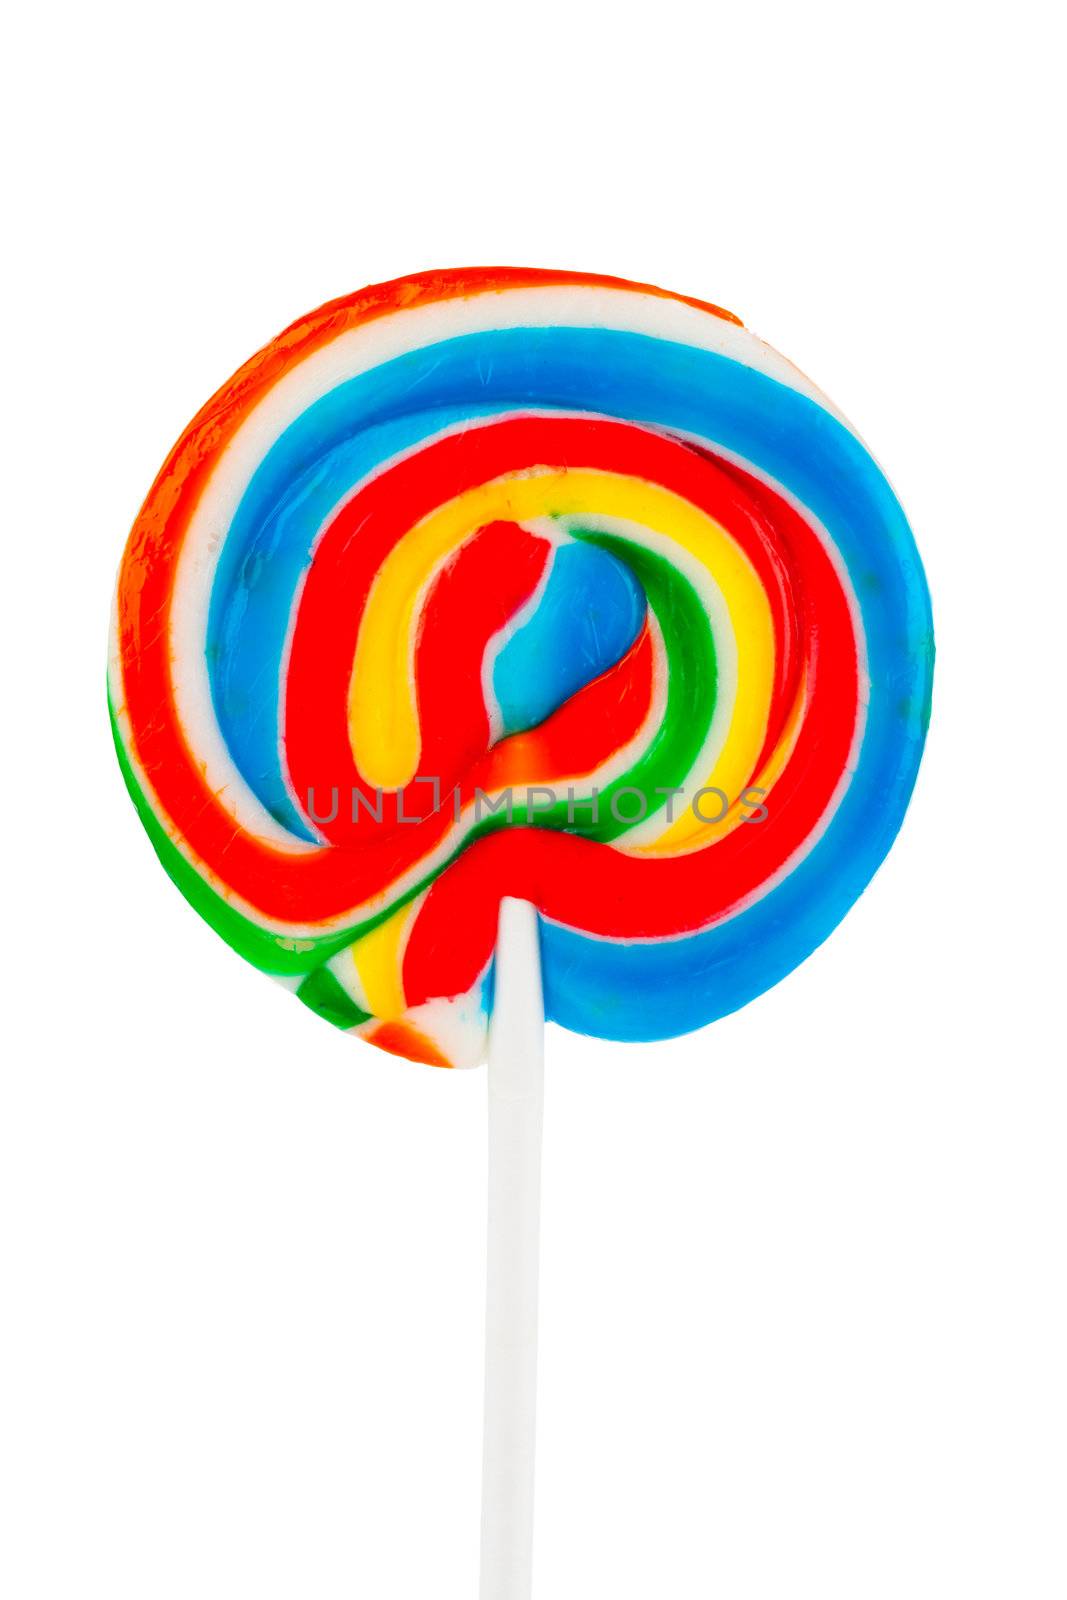 Colorful spiral lollipop isolated on white background by motorolka